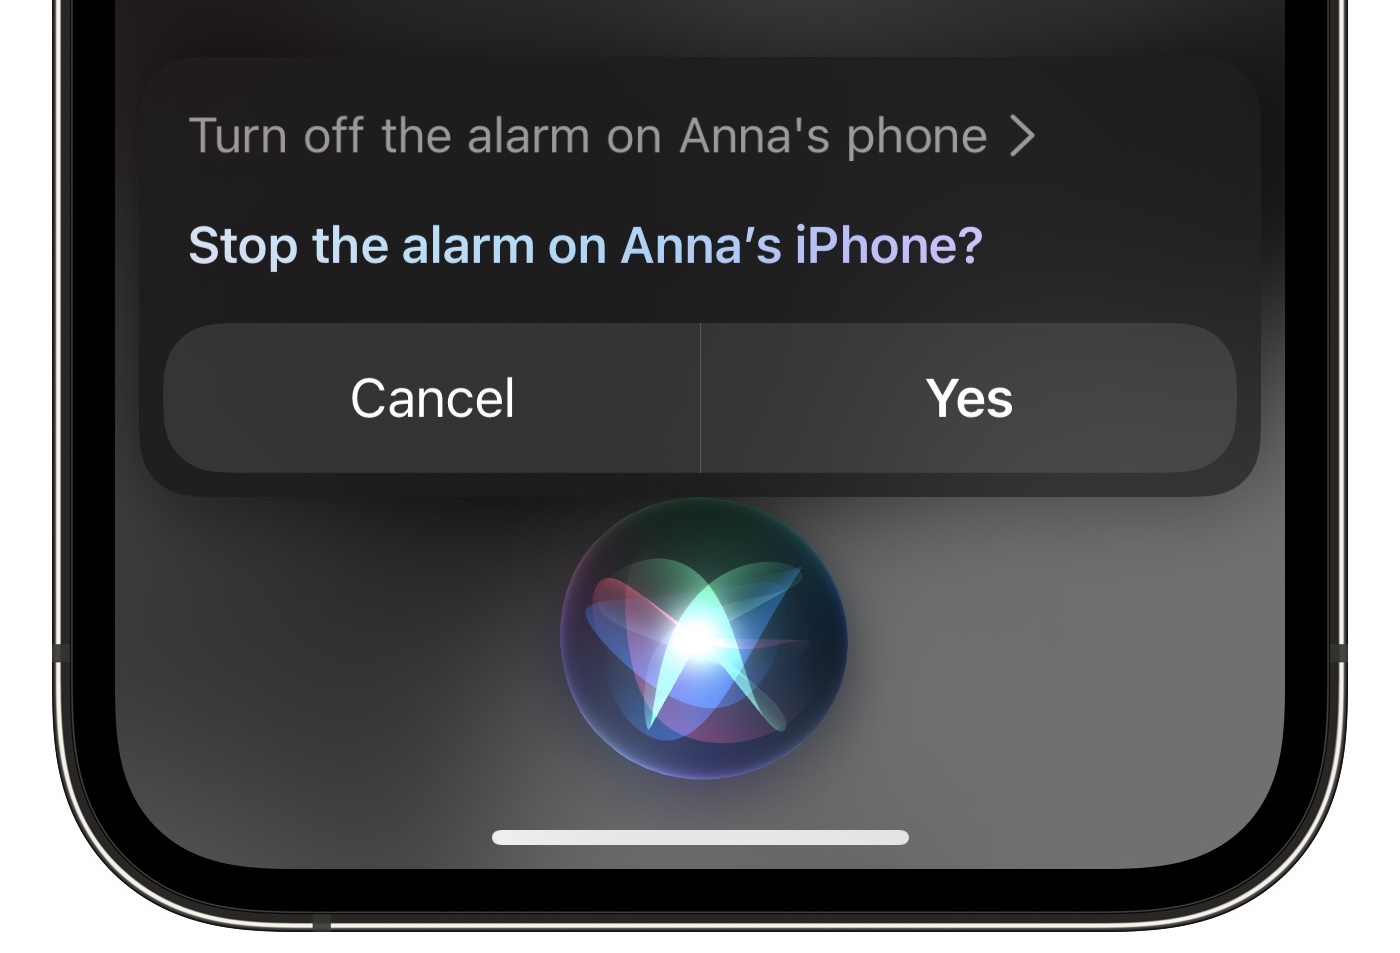 How to Silence An Alarm on a Family Member’s iPhone Using Your Own iPhone